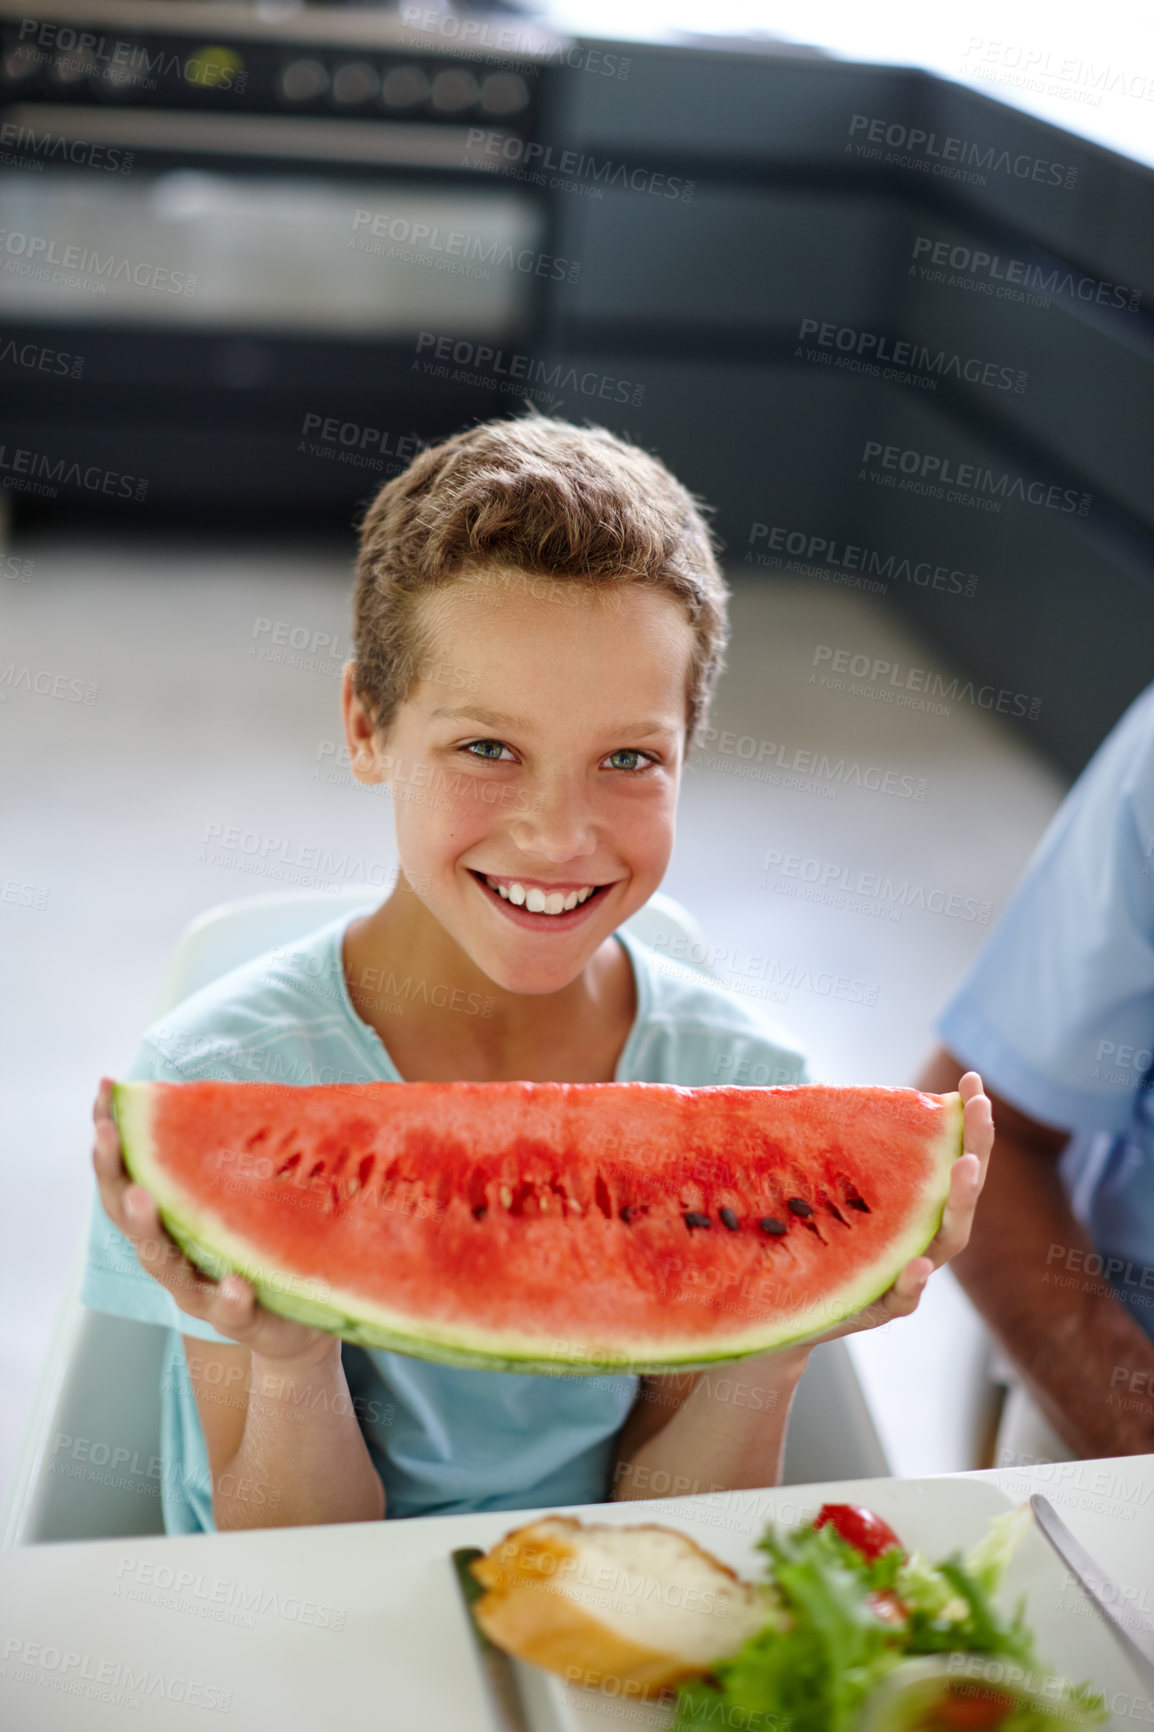 Buy stock photo Portrait of a happy little boy holding up a slice of watermelon at home